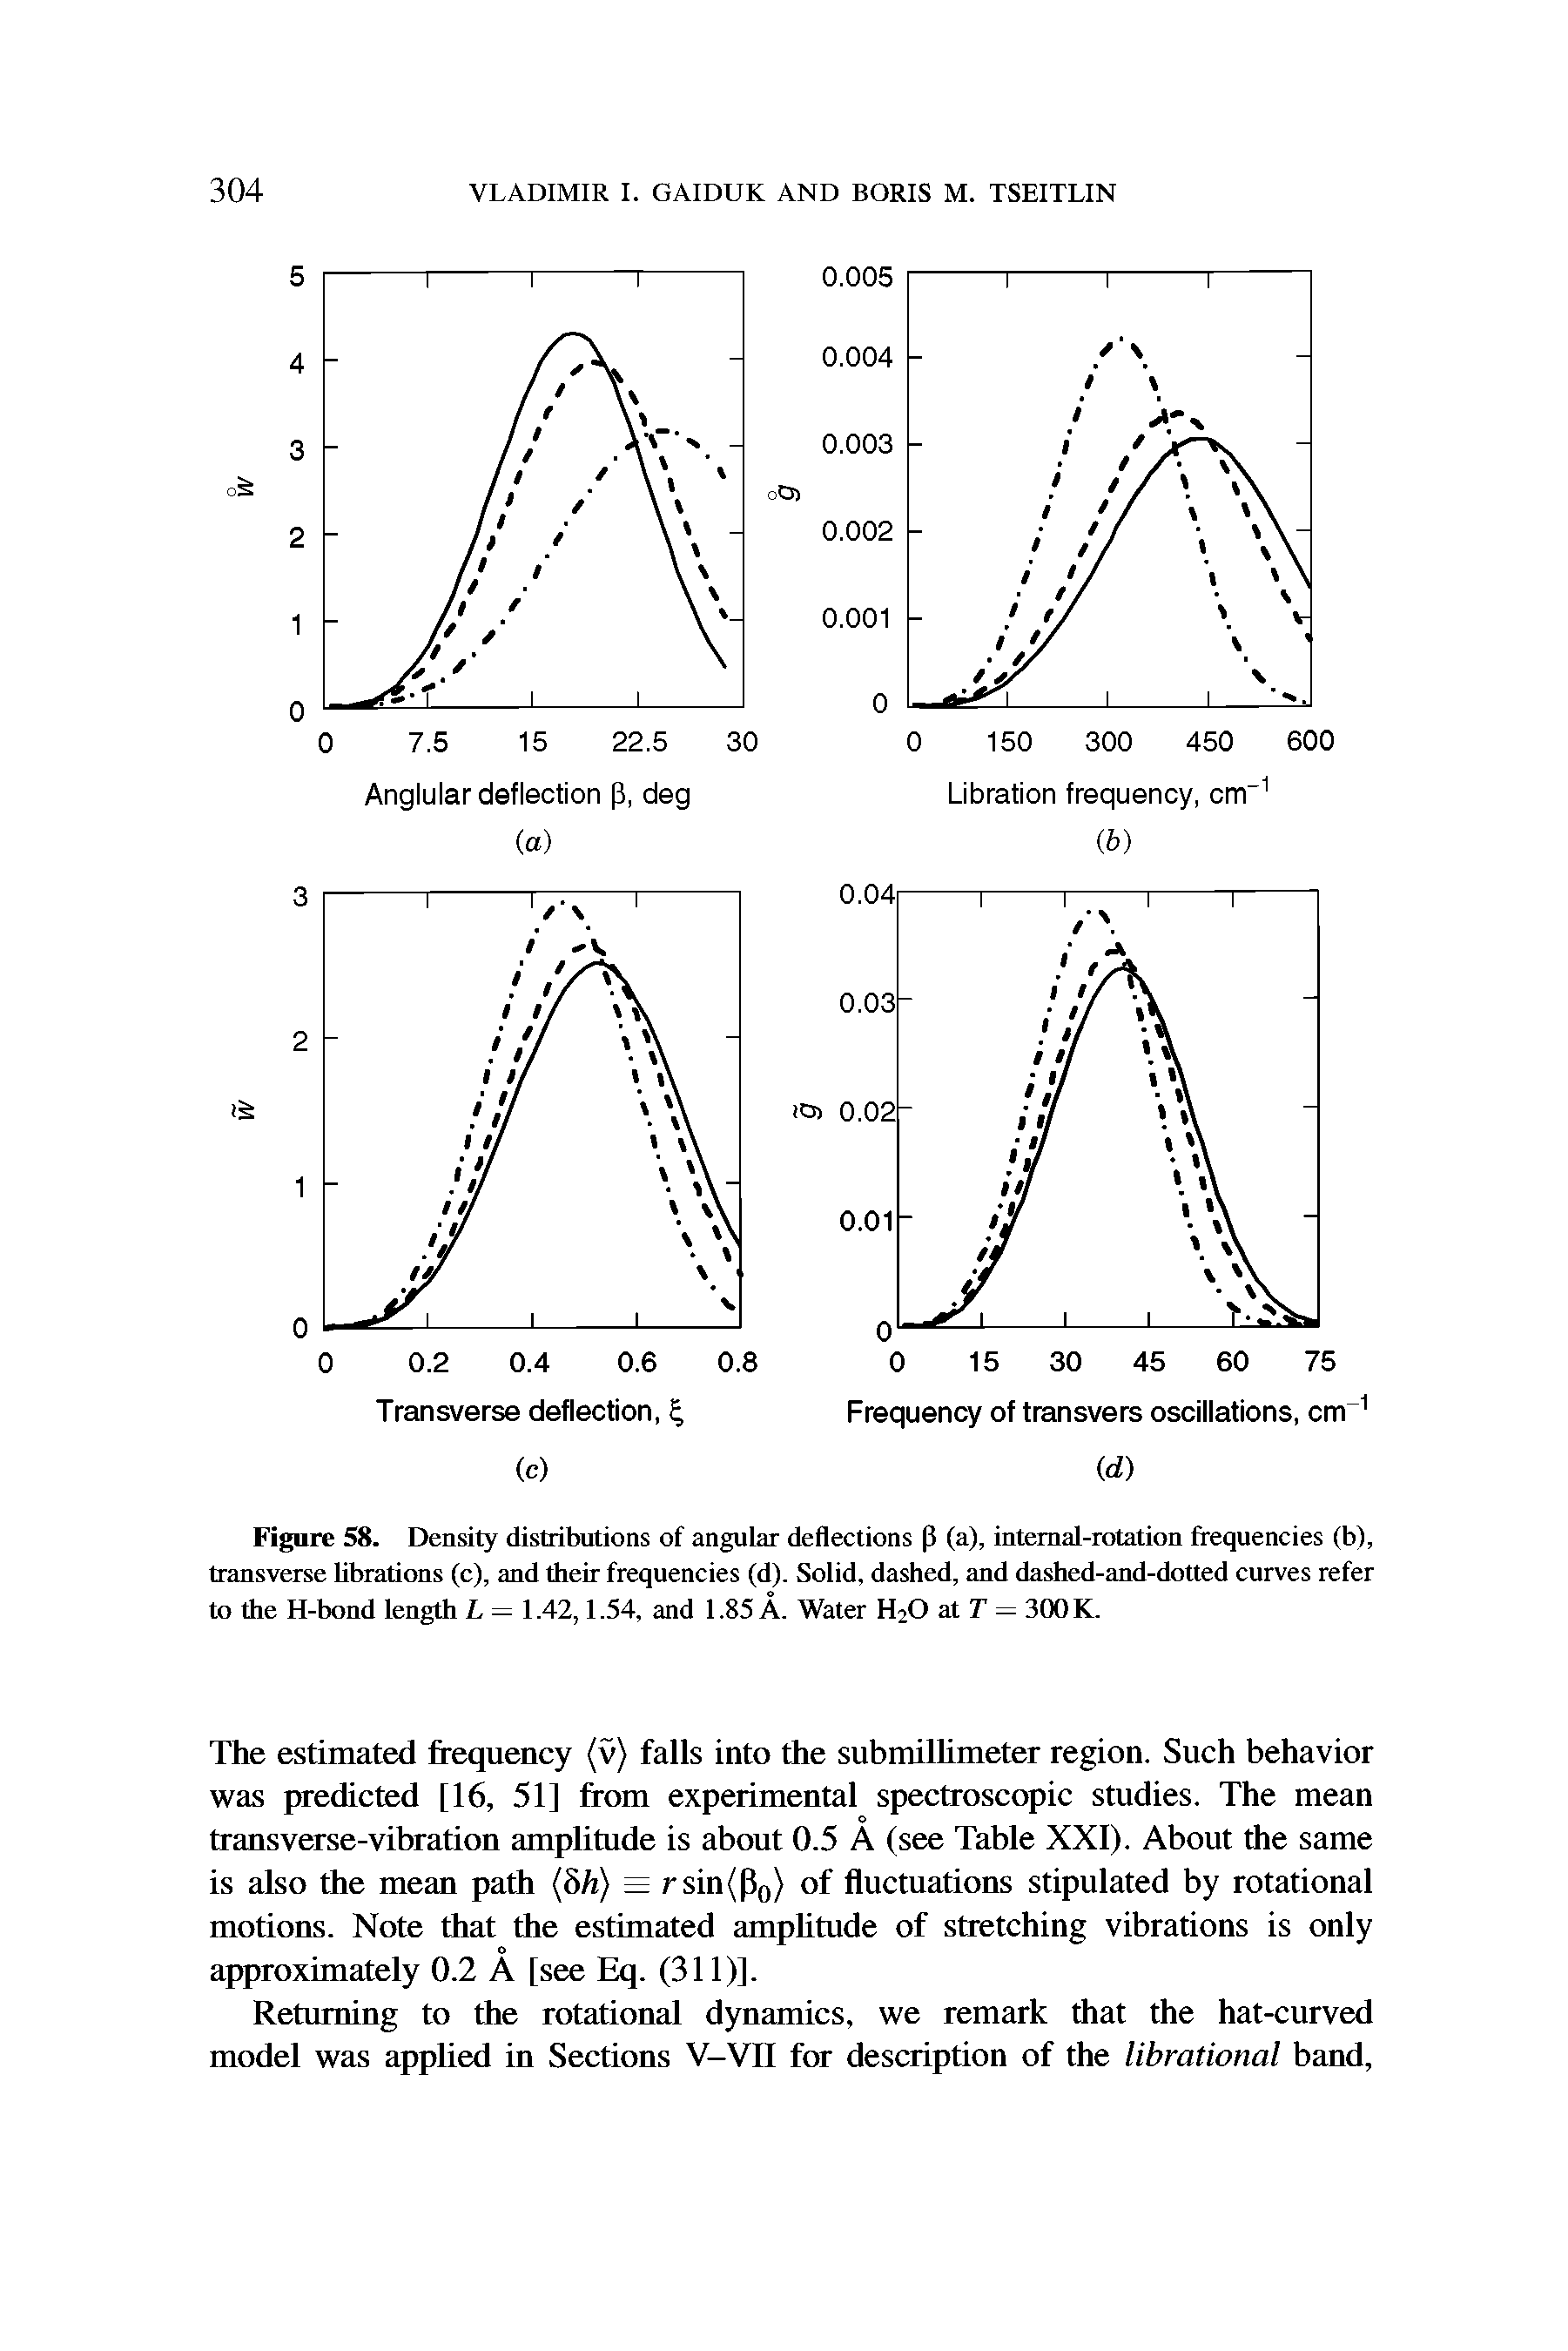 Figure 58. Density distributions of angular deflections P (a), internal-rotation frequencies (b), transverse librations (c), and their frequencies (d). Solid, dashed, and dashed-and-dotted curves refer to the H-bond length /, — 1.42,1.54, and 1.85 A. Water H2O at T — 3(X) K.